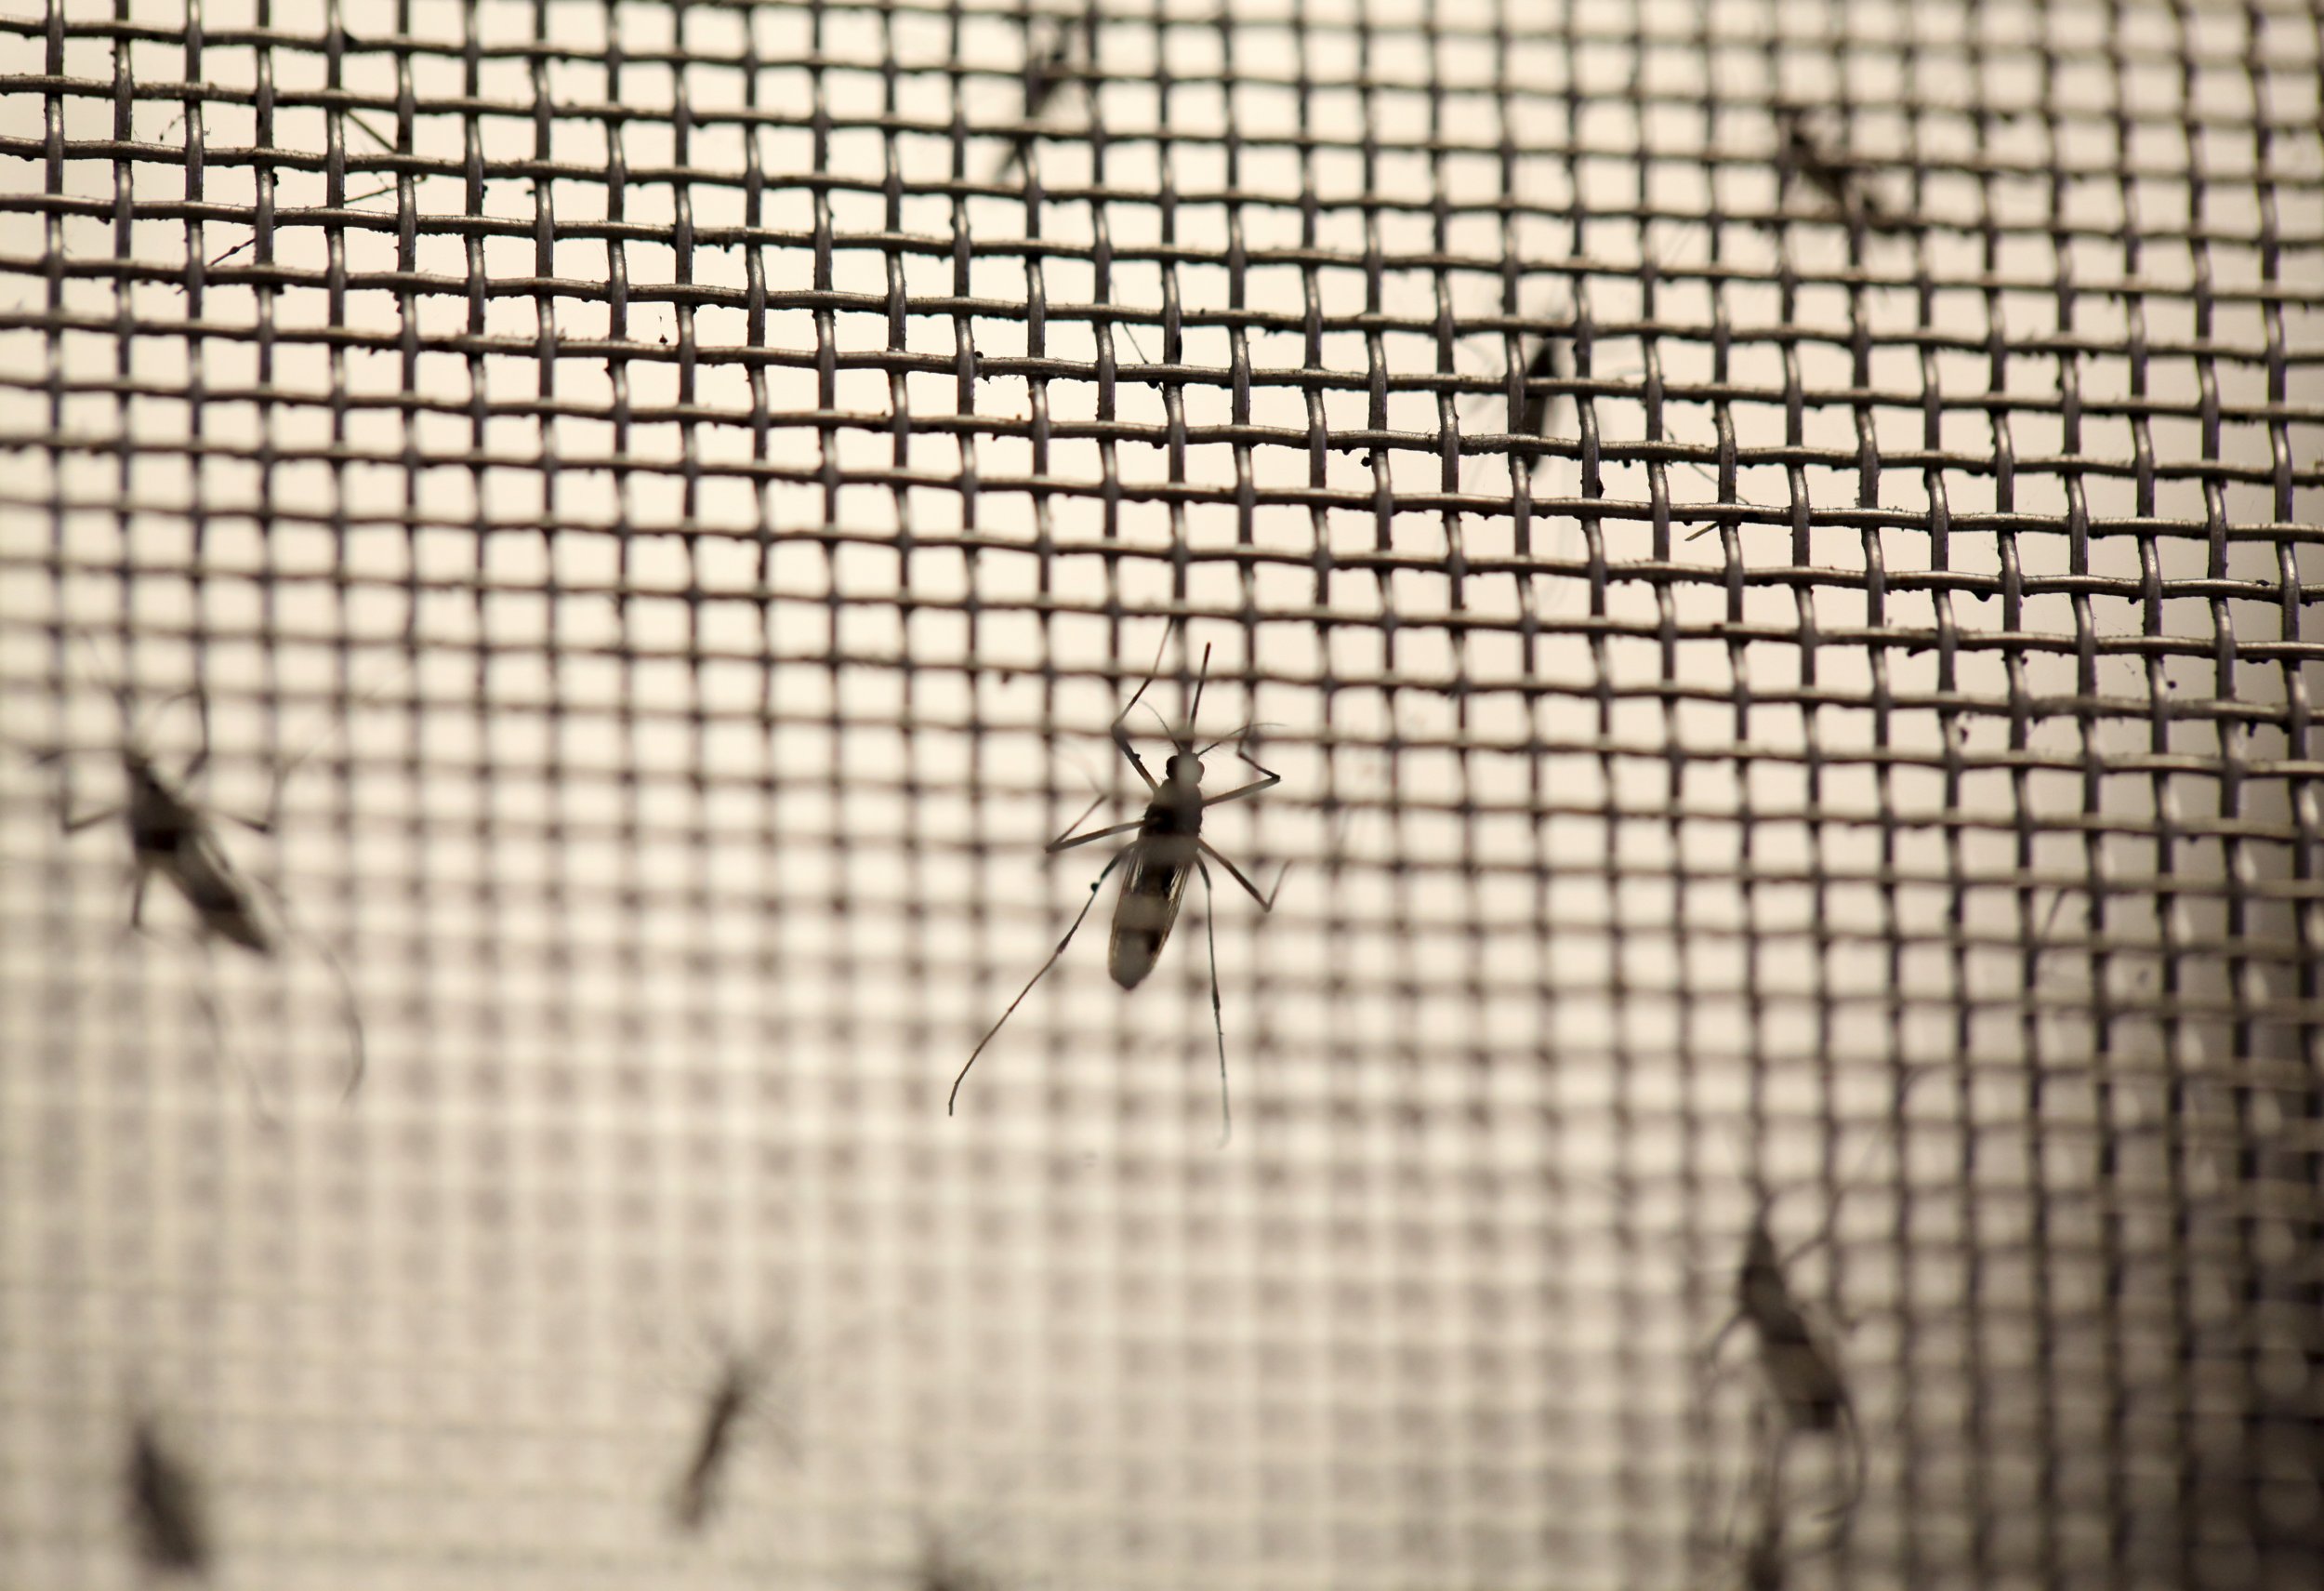 Aedes aegypti mosquitoes in a laboratory.